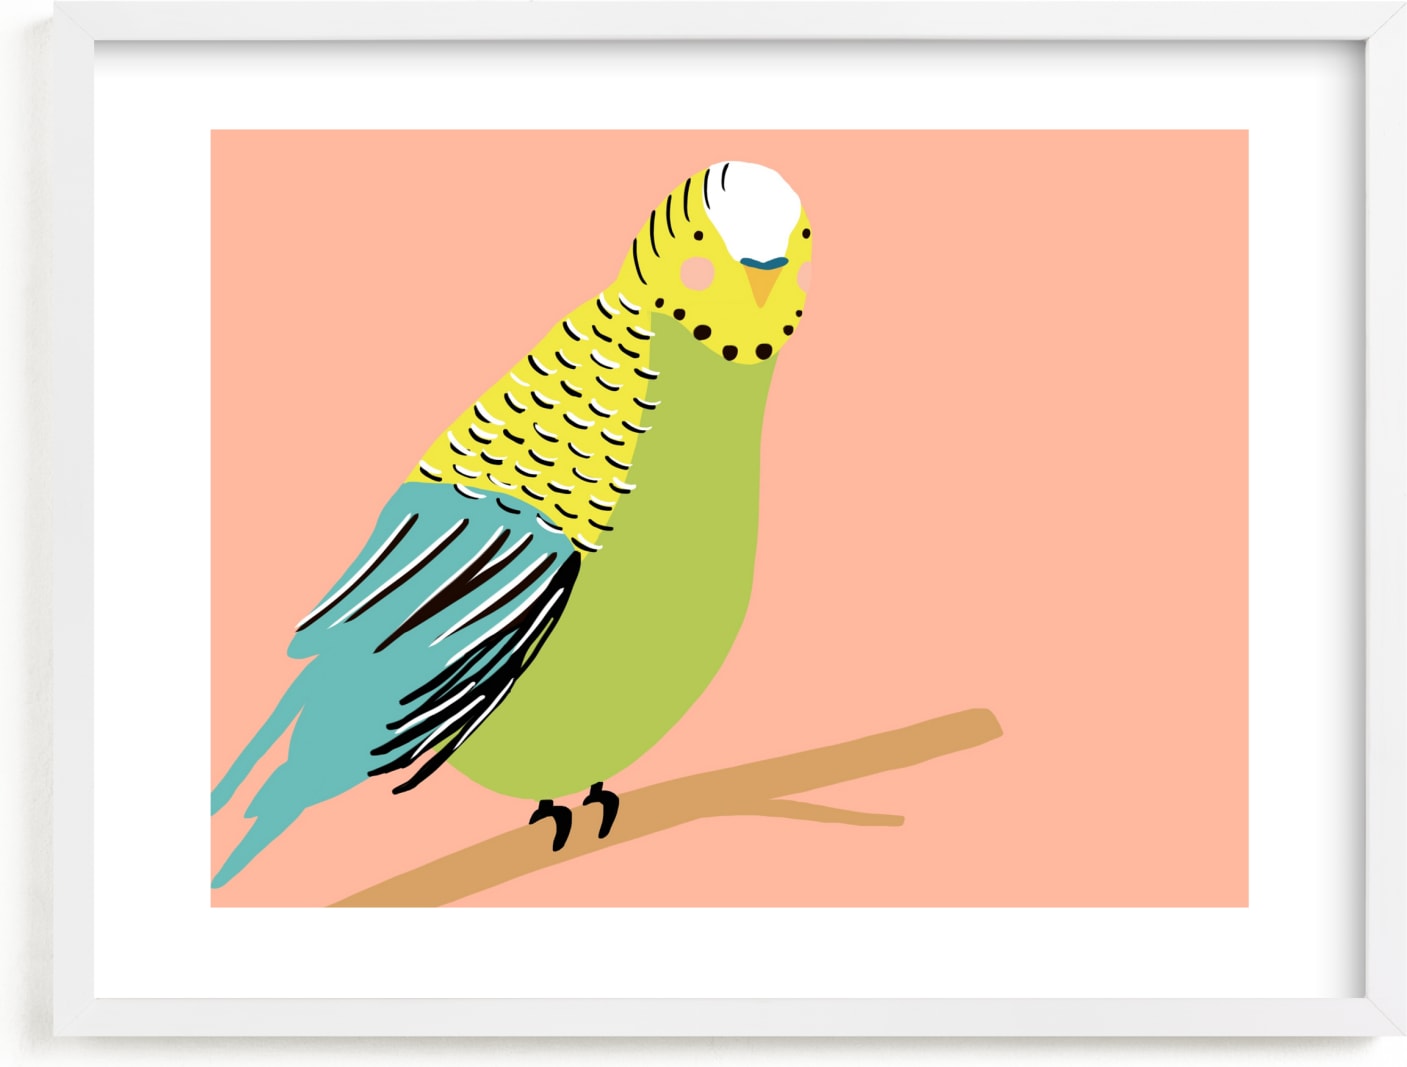 This is a non classic colors kids wall art by merry mack creative called Sweet Parakeet.